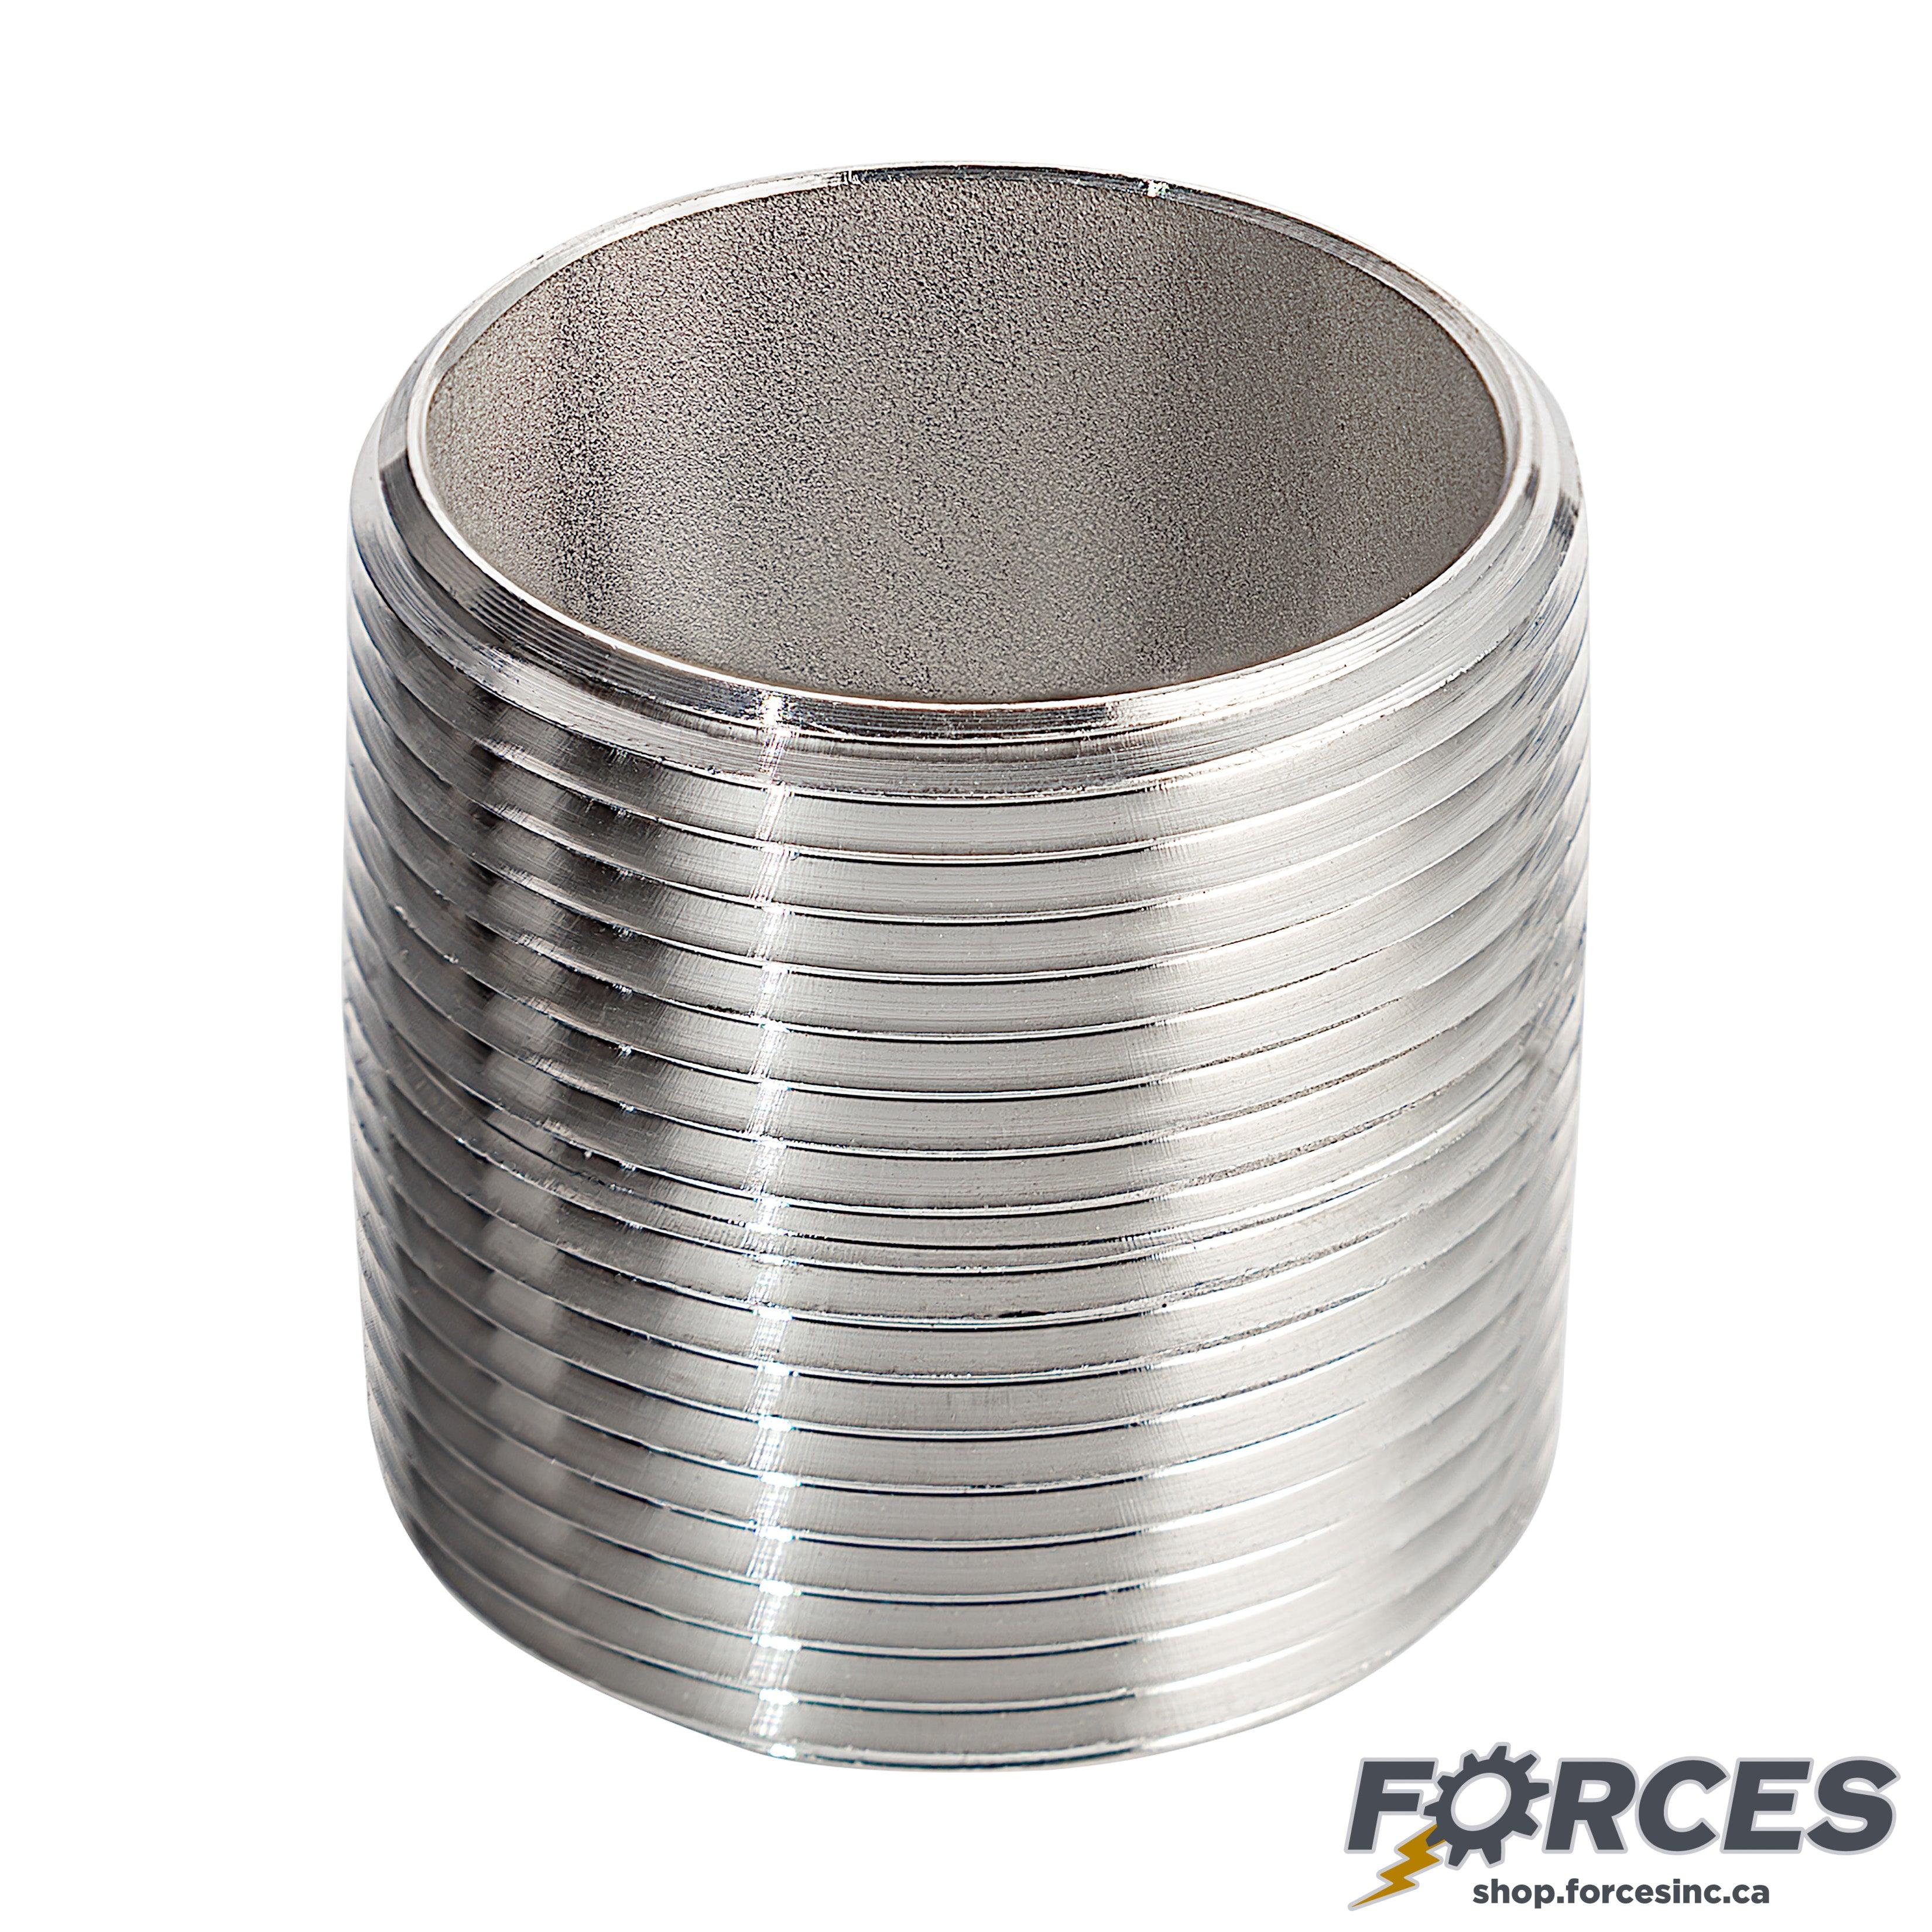 1/4" Closed Nipple - Stainless Steel 316 - Forces Inc